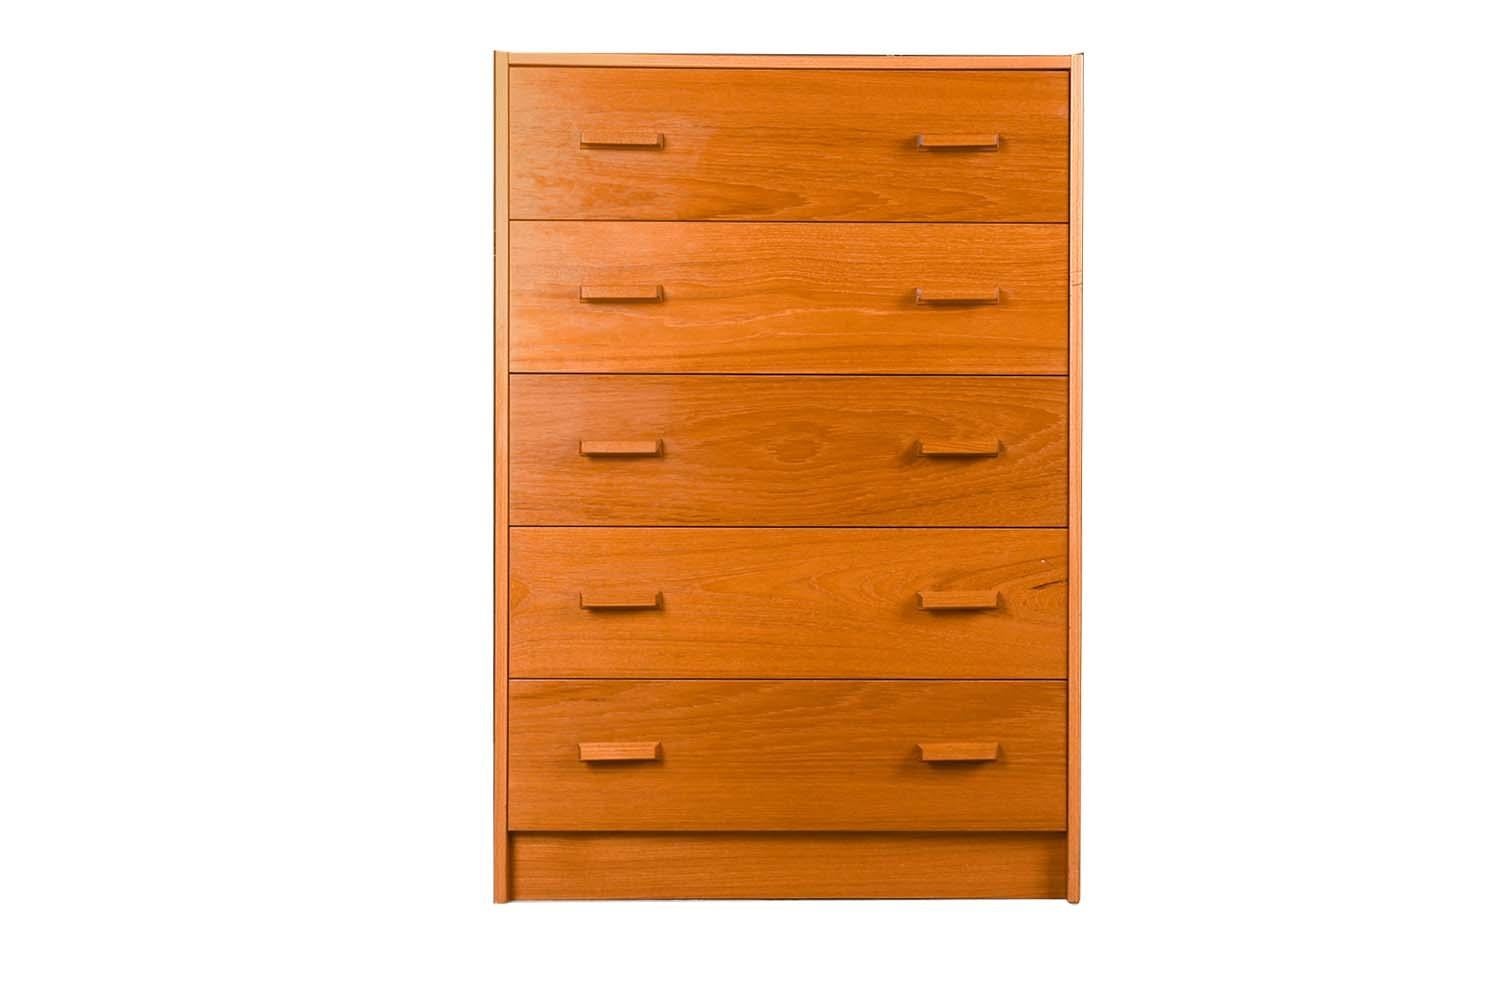 Mid-Century Modern teak high boy dresser, chest of drawers, made in Denmark. Minimalist Danish Modern inspired profile and extremely well-made dresser, has incredible lines and detailing. Stunning teak grain high boy dresser accented with sculpted